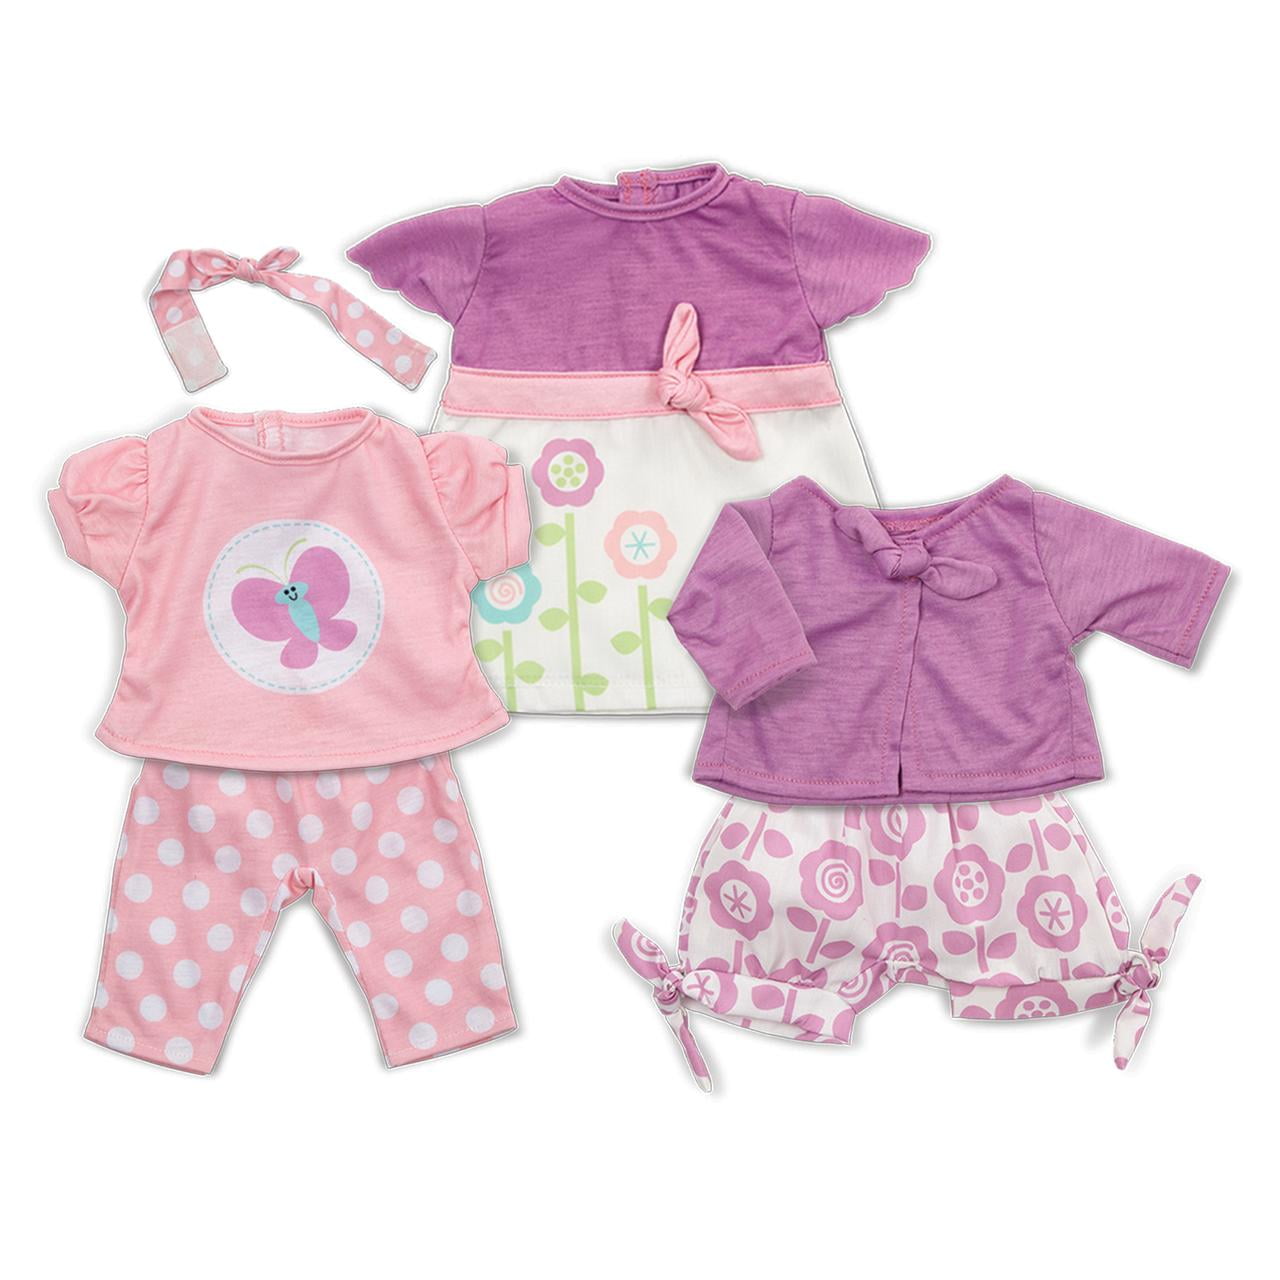 Mix & Match Doll Clothes Set for Kids